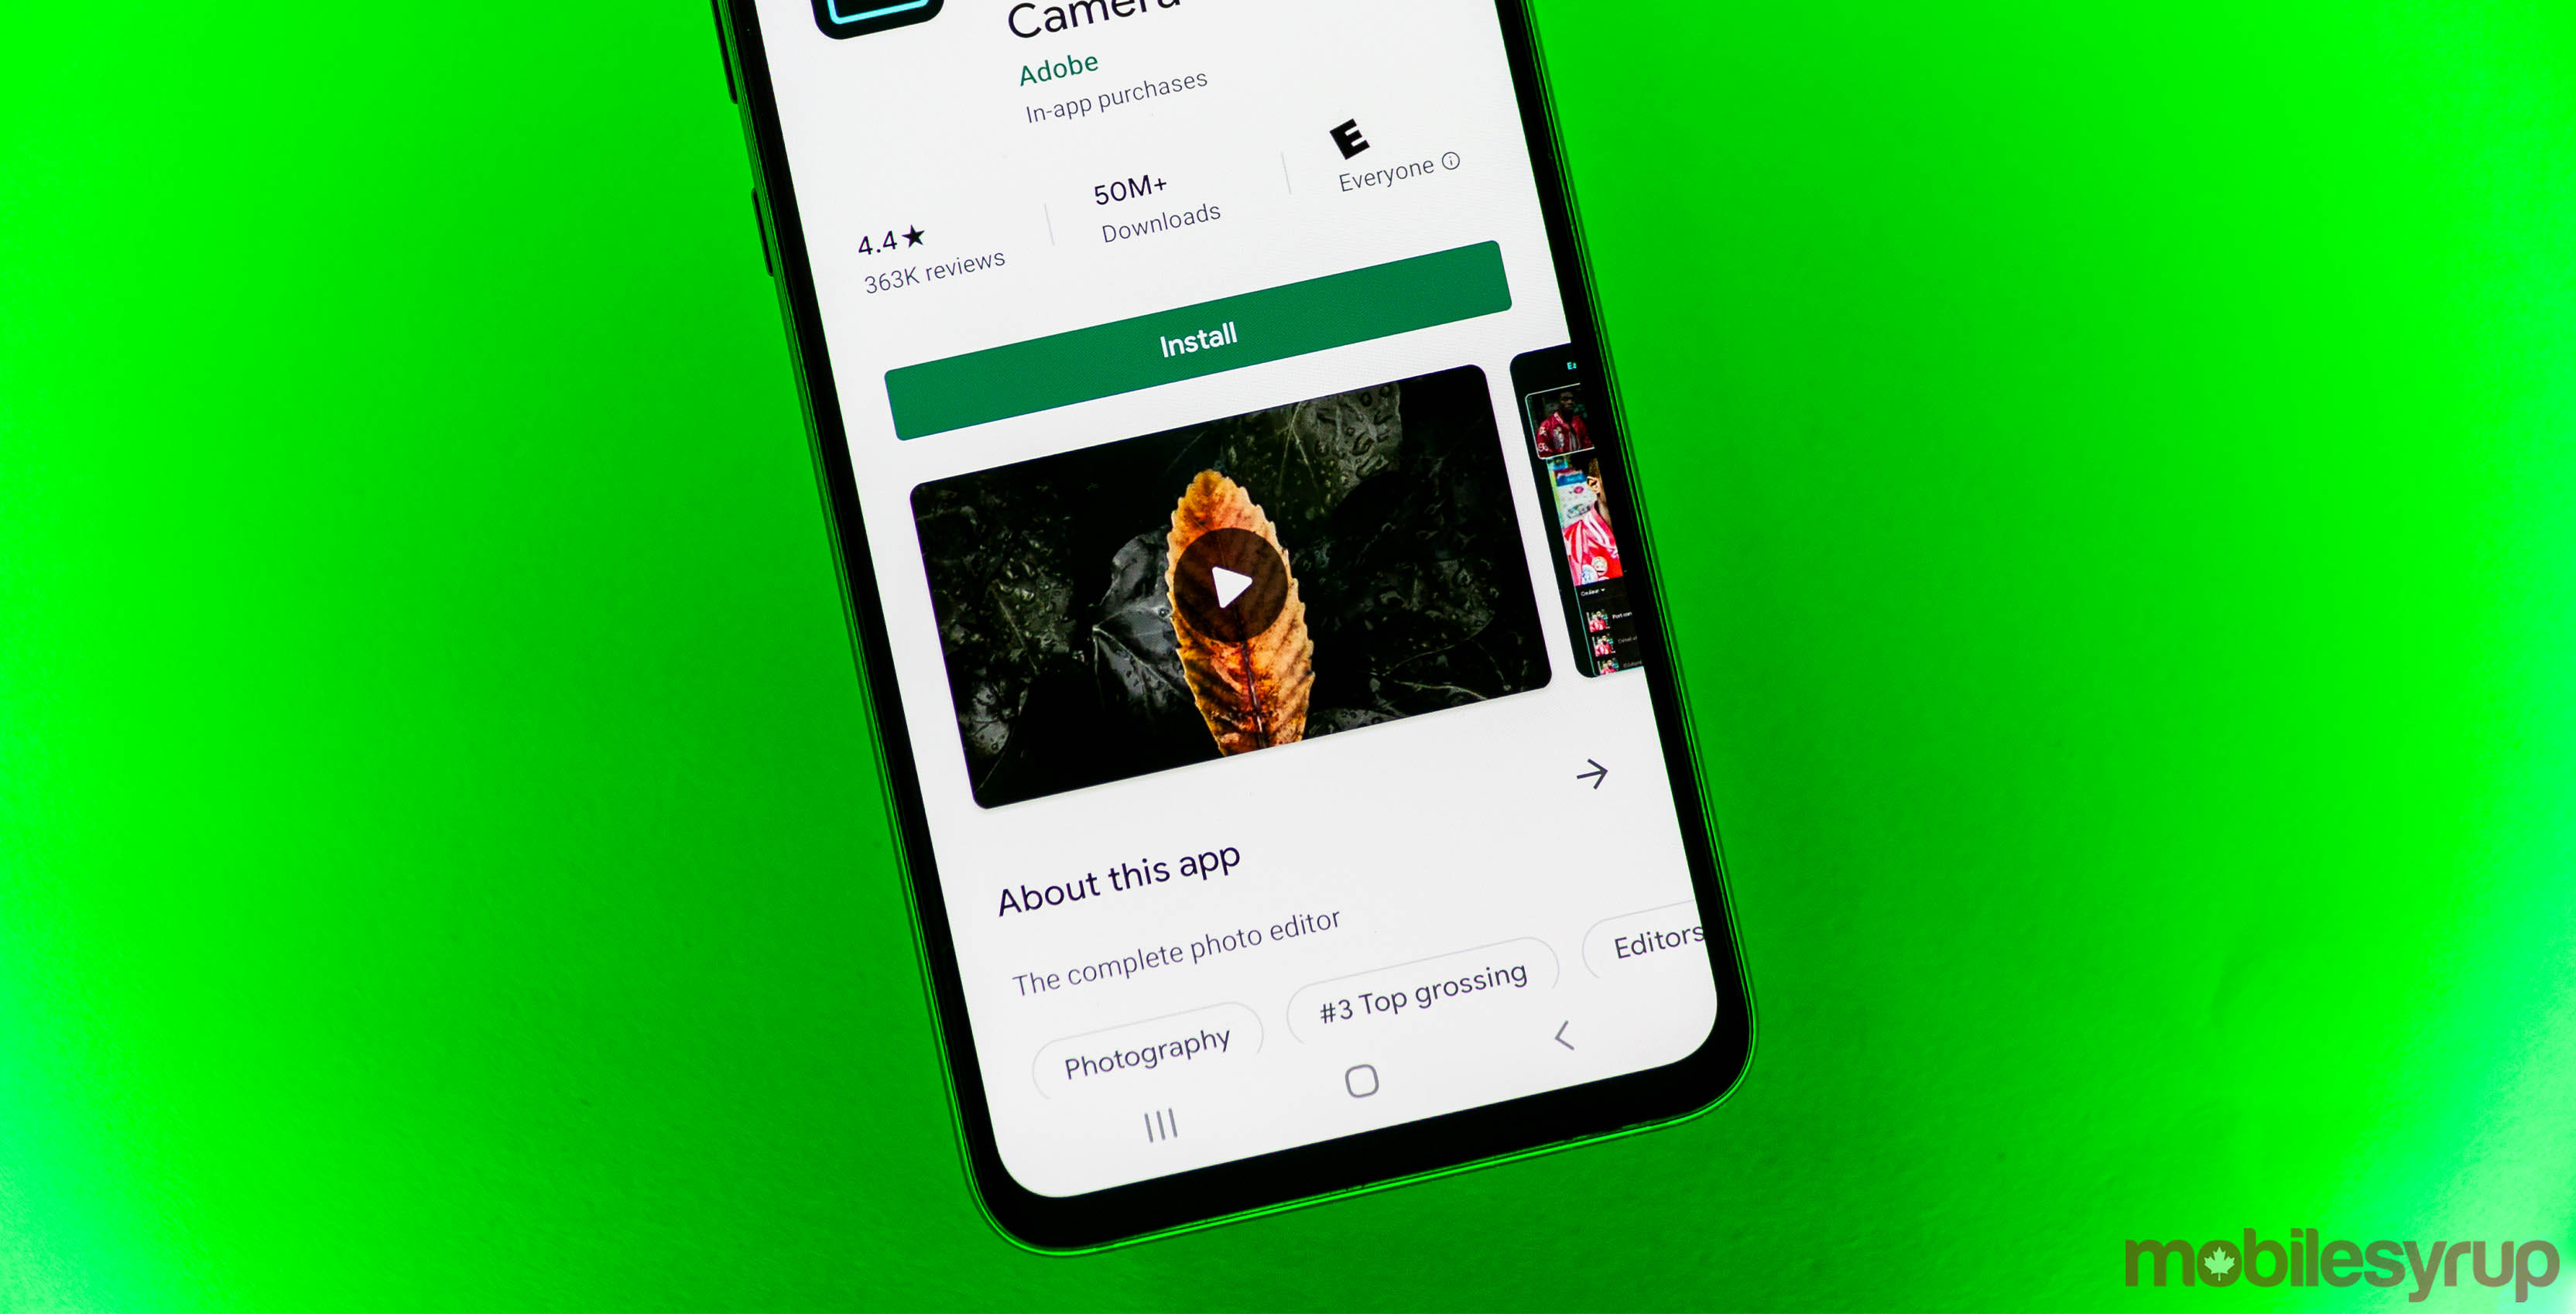 Google Play Store listings will auto-play videos starting in September